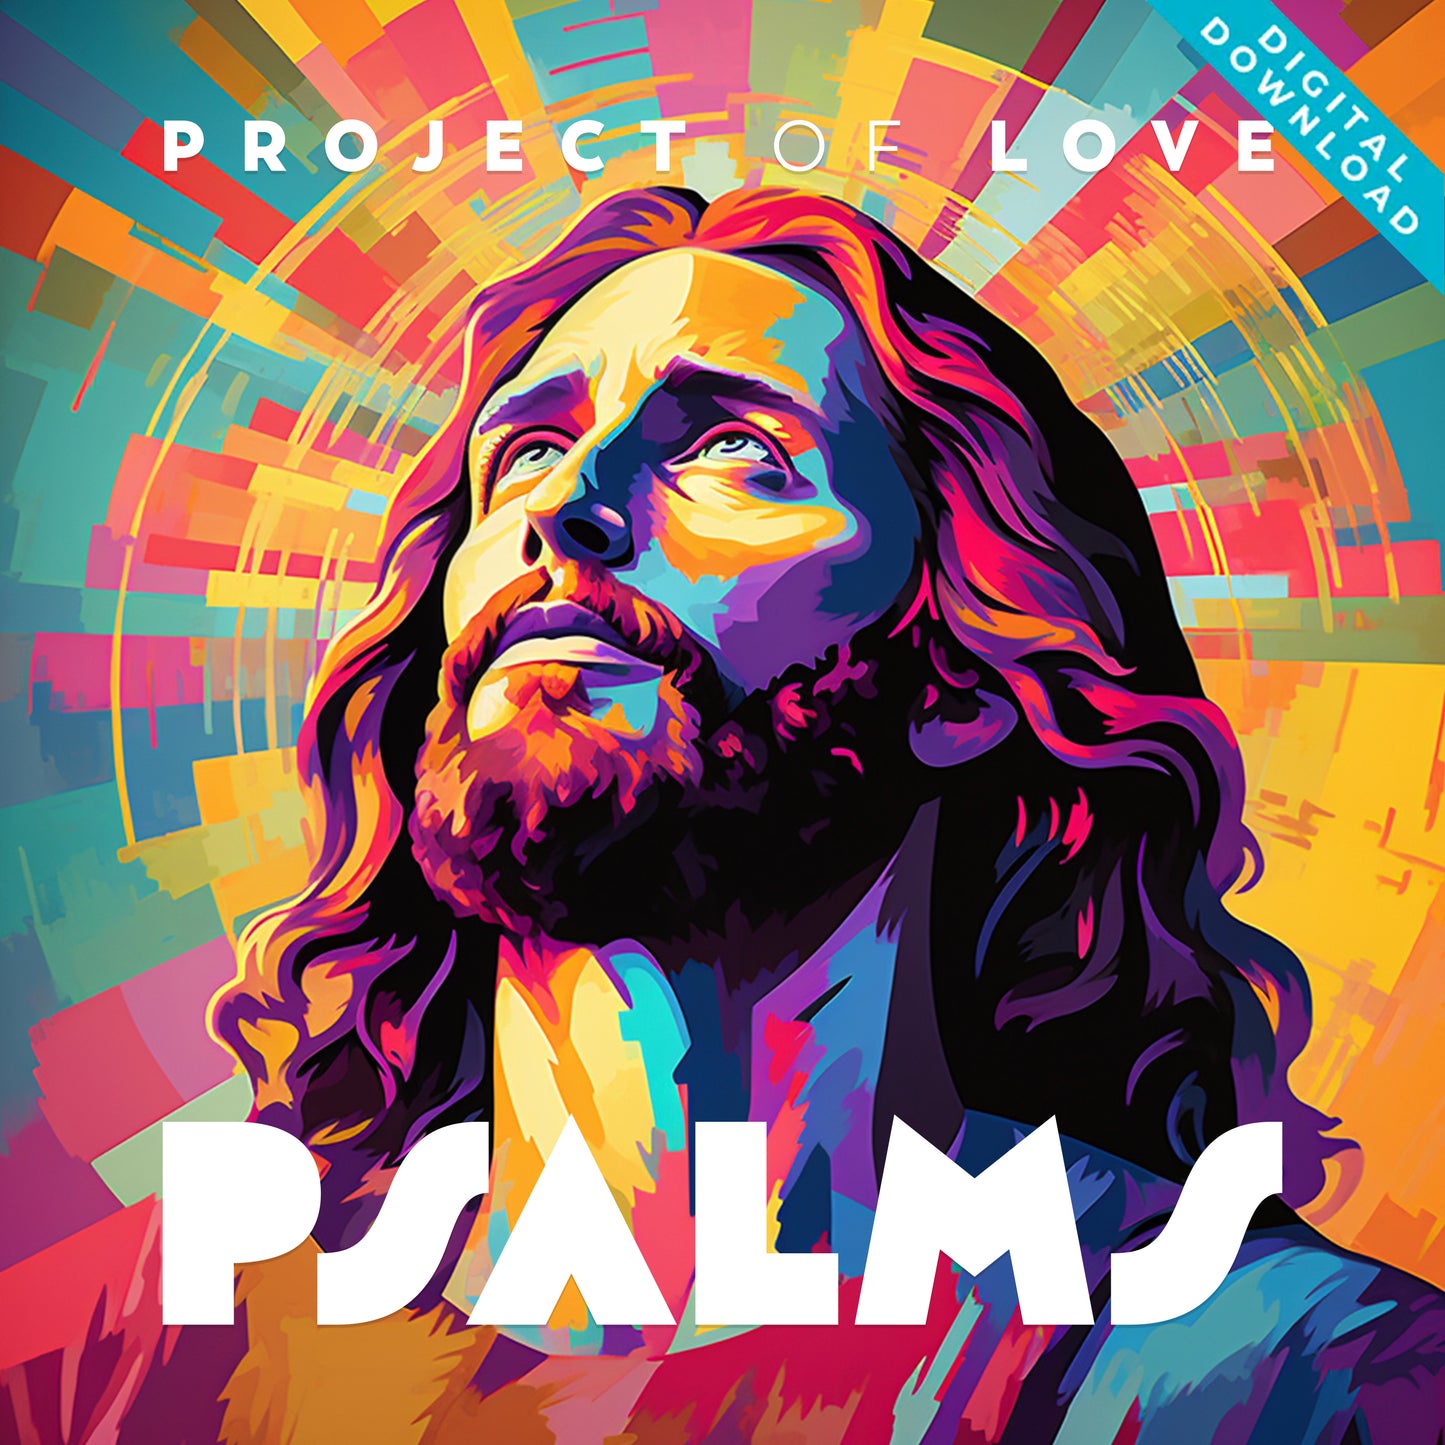 Digital album 'Psalms' - Download 19 Psalms in song – Project of Love